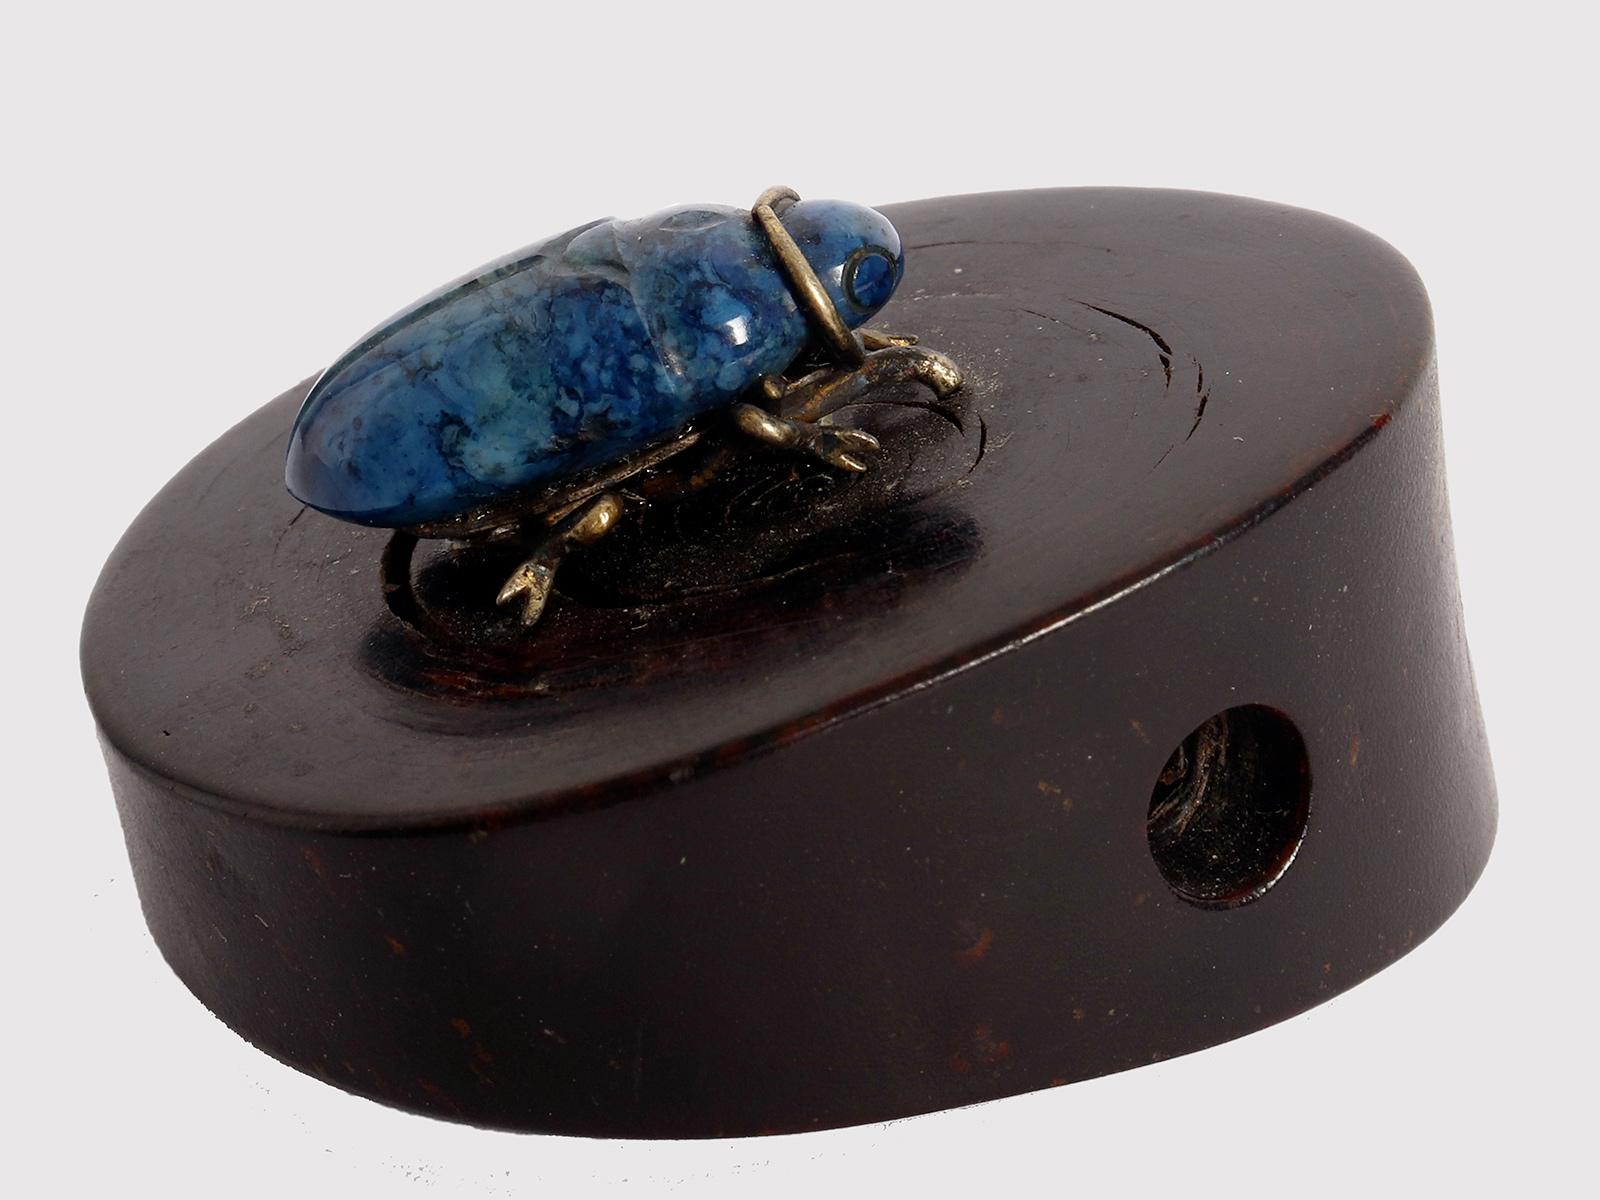 Black monochrome horn netsuke emulating an asymmetrically sectioned tree trunk. Along the top climbs an insect carved in lapis lazuli and finished with gold details. Japan, Meiji period (1867-1912), around 1870.